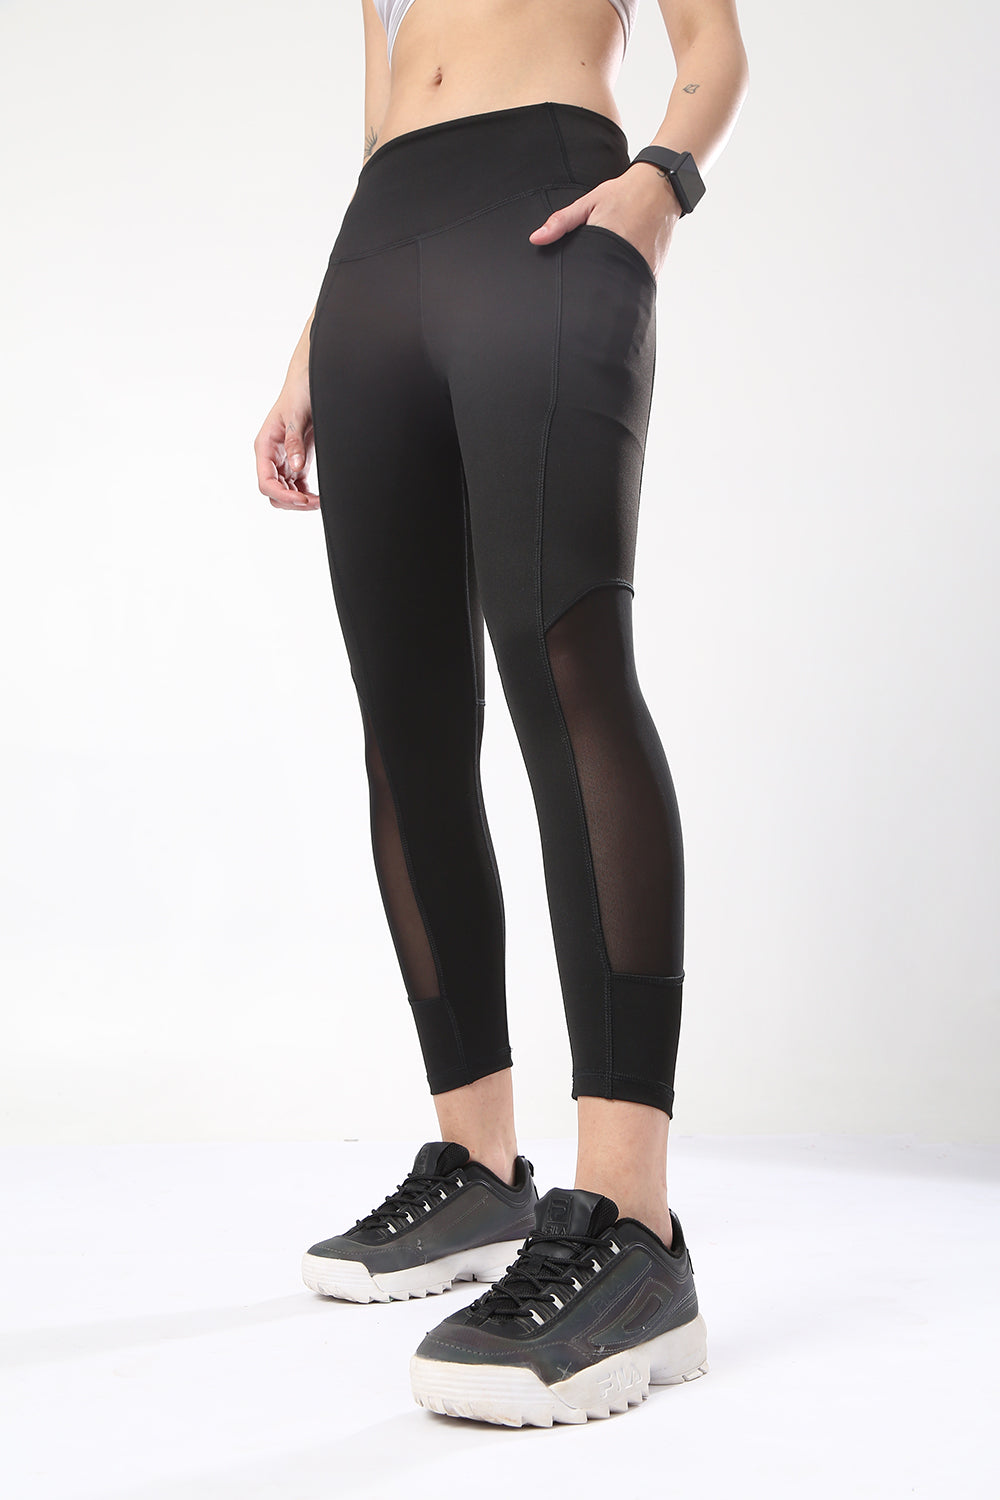 Women's Mesh Paneled Sculpted Tights